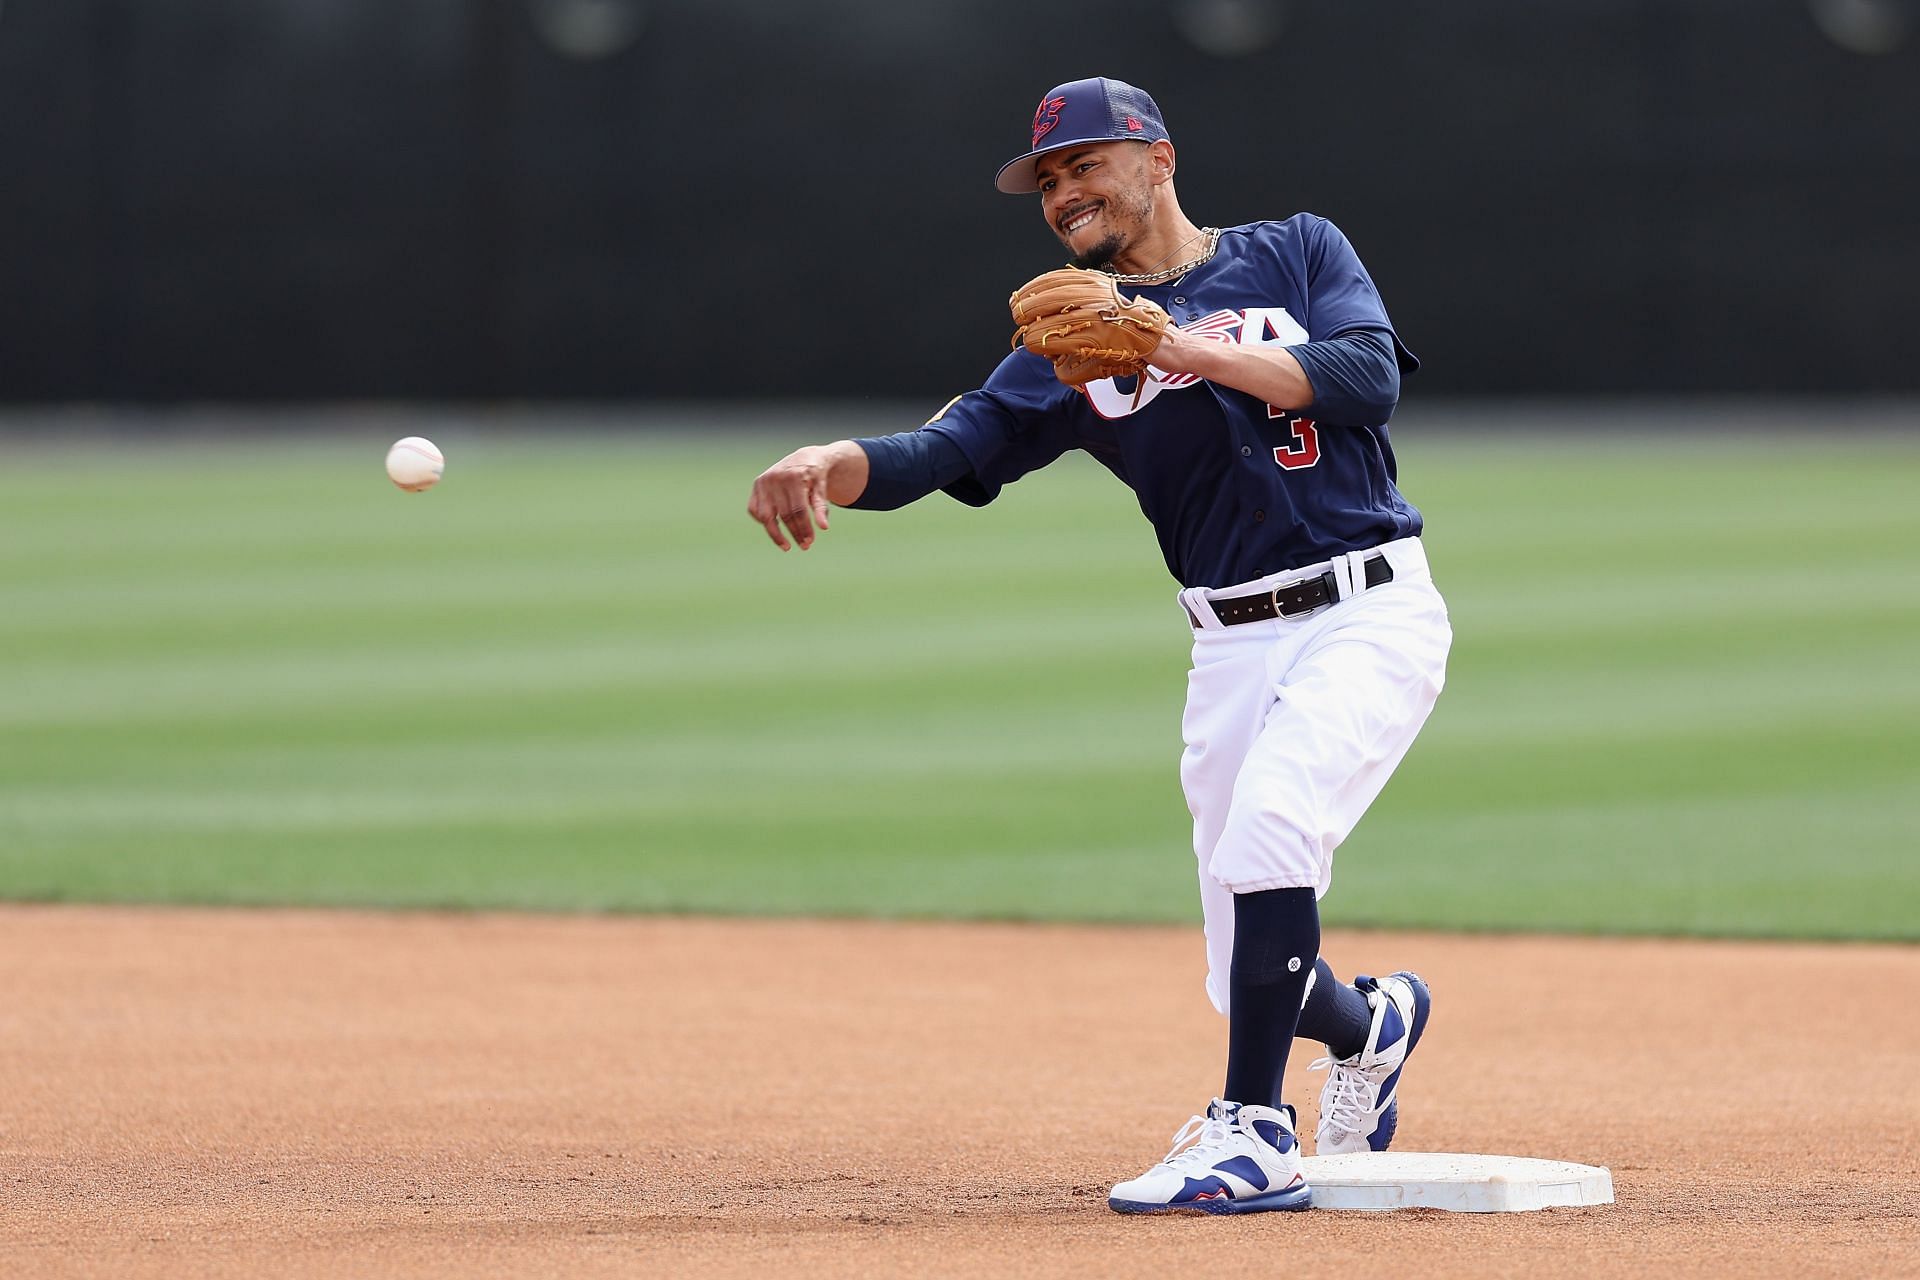 Team USA fans react to seeing Mookie Betts practicing at second